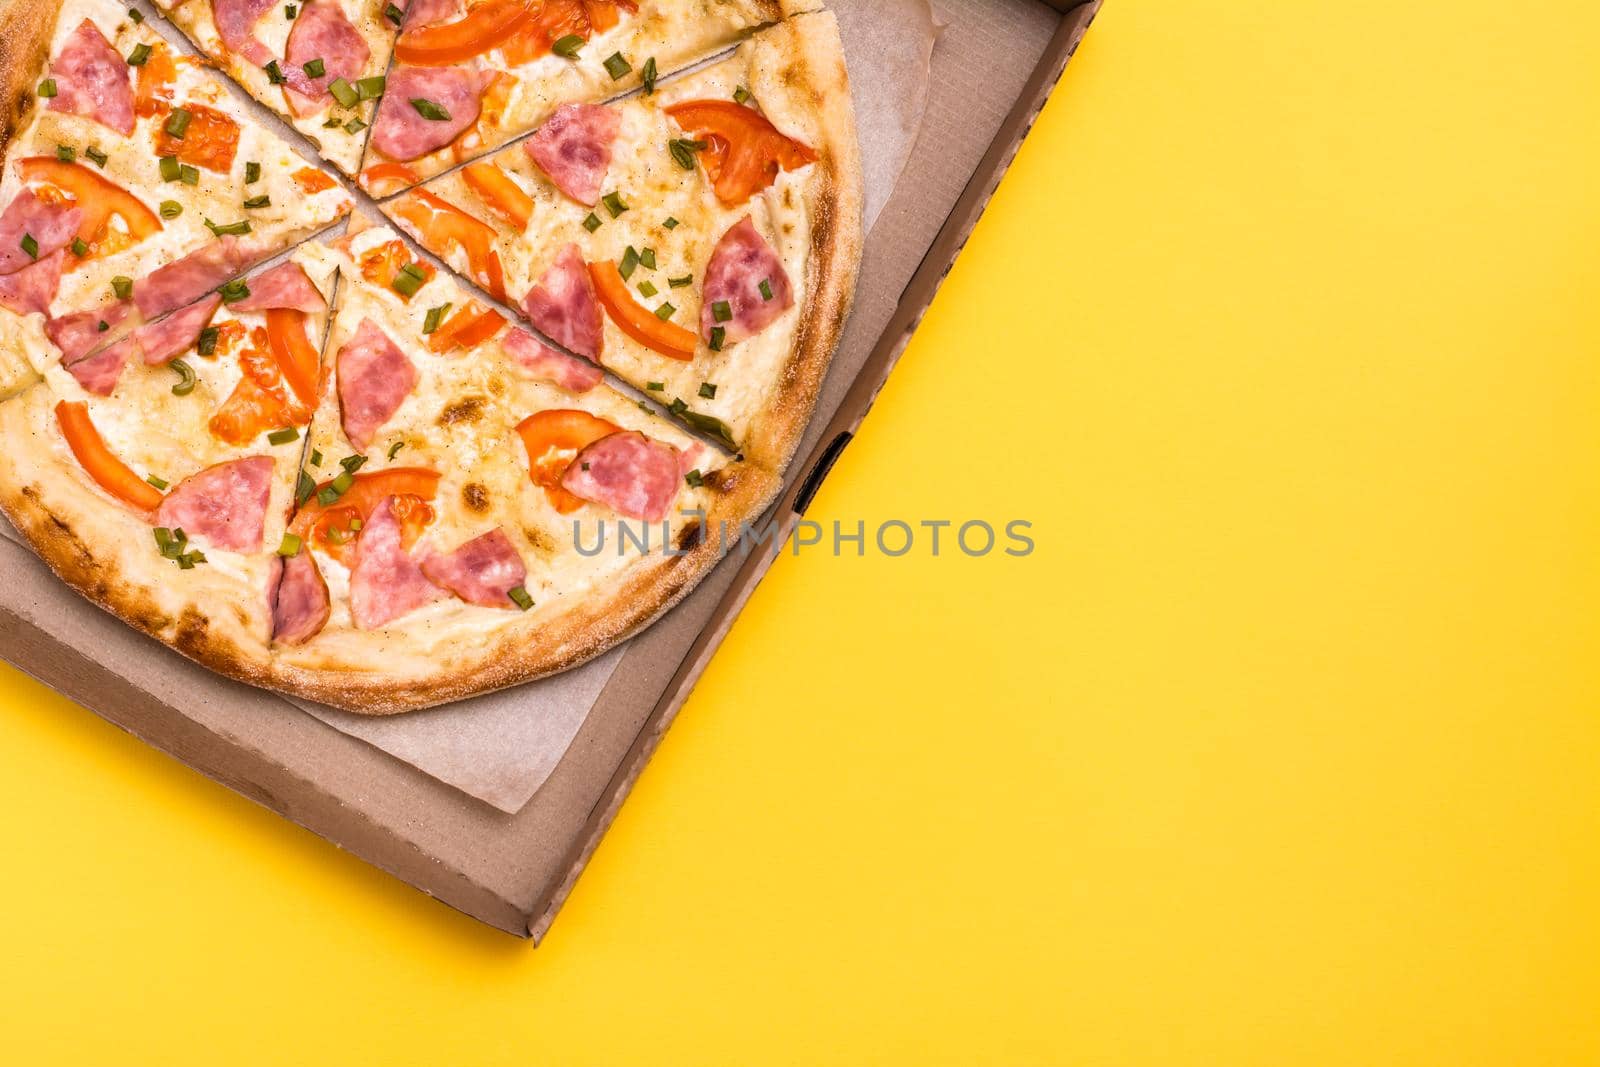 Takeaway and delivery. Ready-to-eat pizza in cardboard box on yellow background by Aleruana